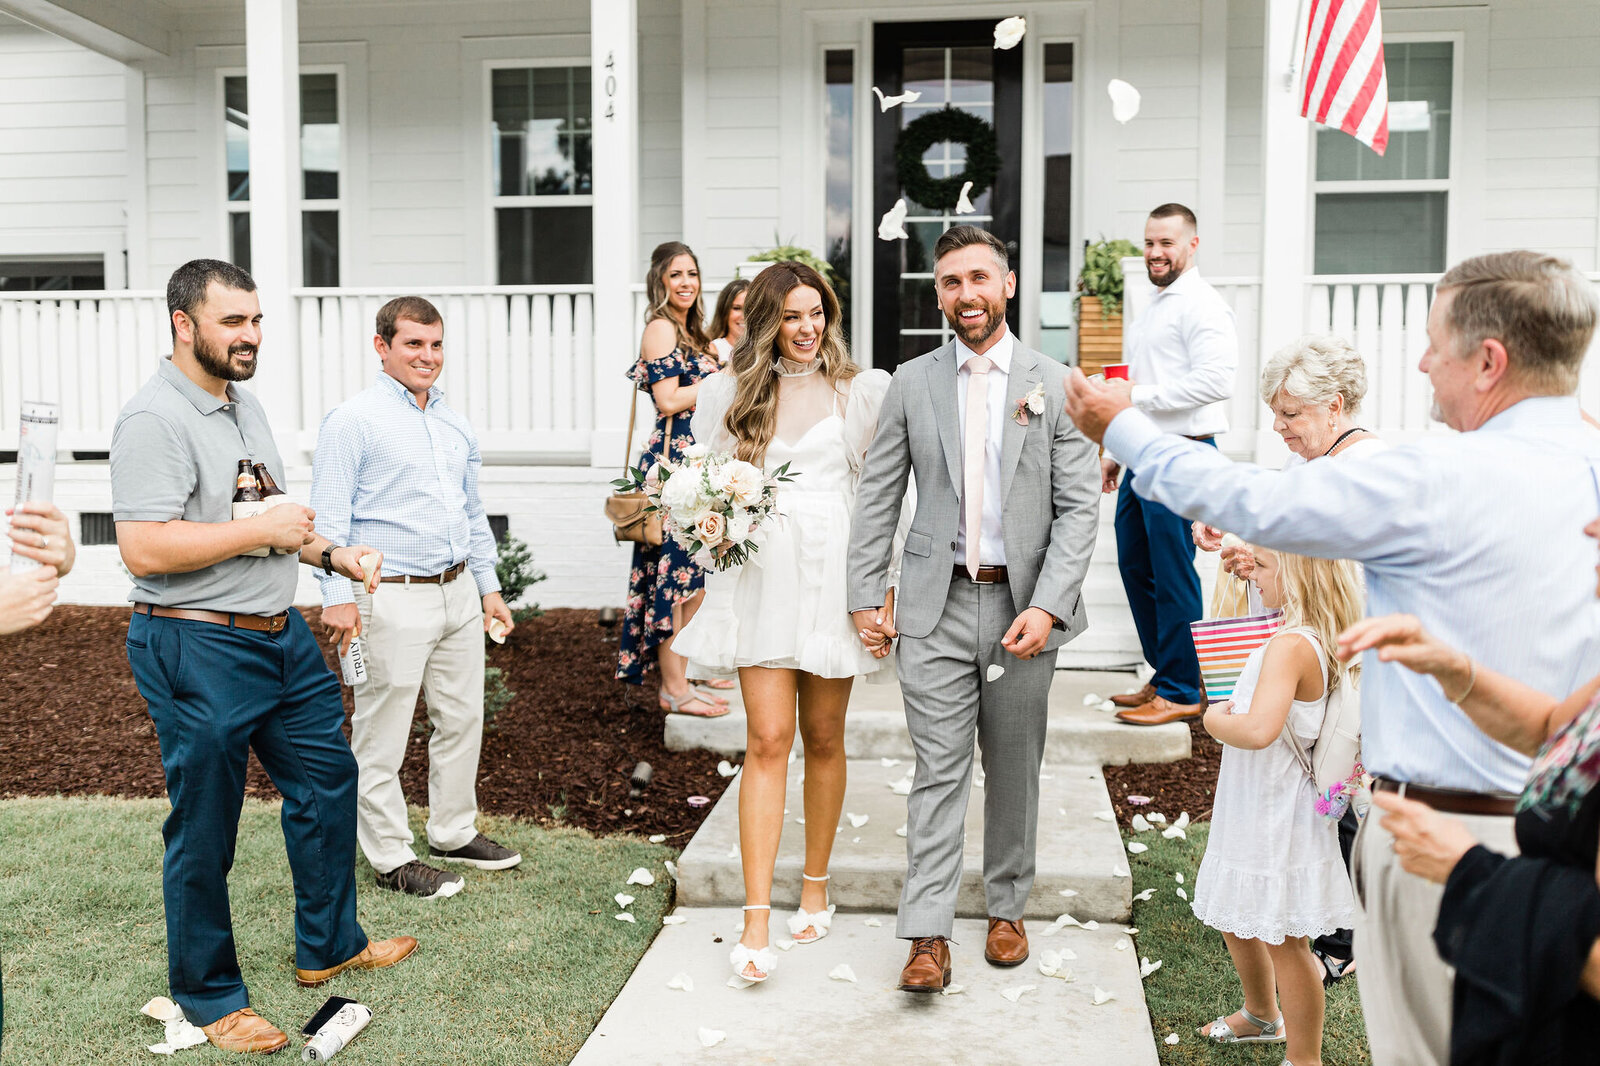 Flower Petal Wedding Ceremony | Raleigh NC | The Axtells Photo and Film